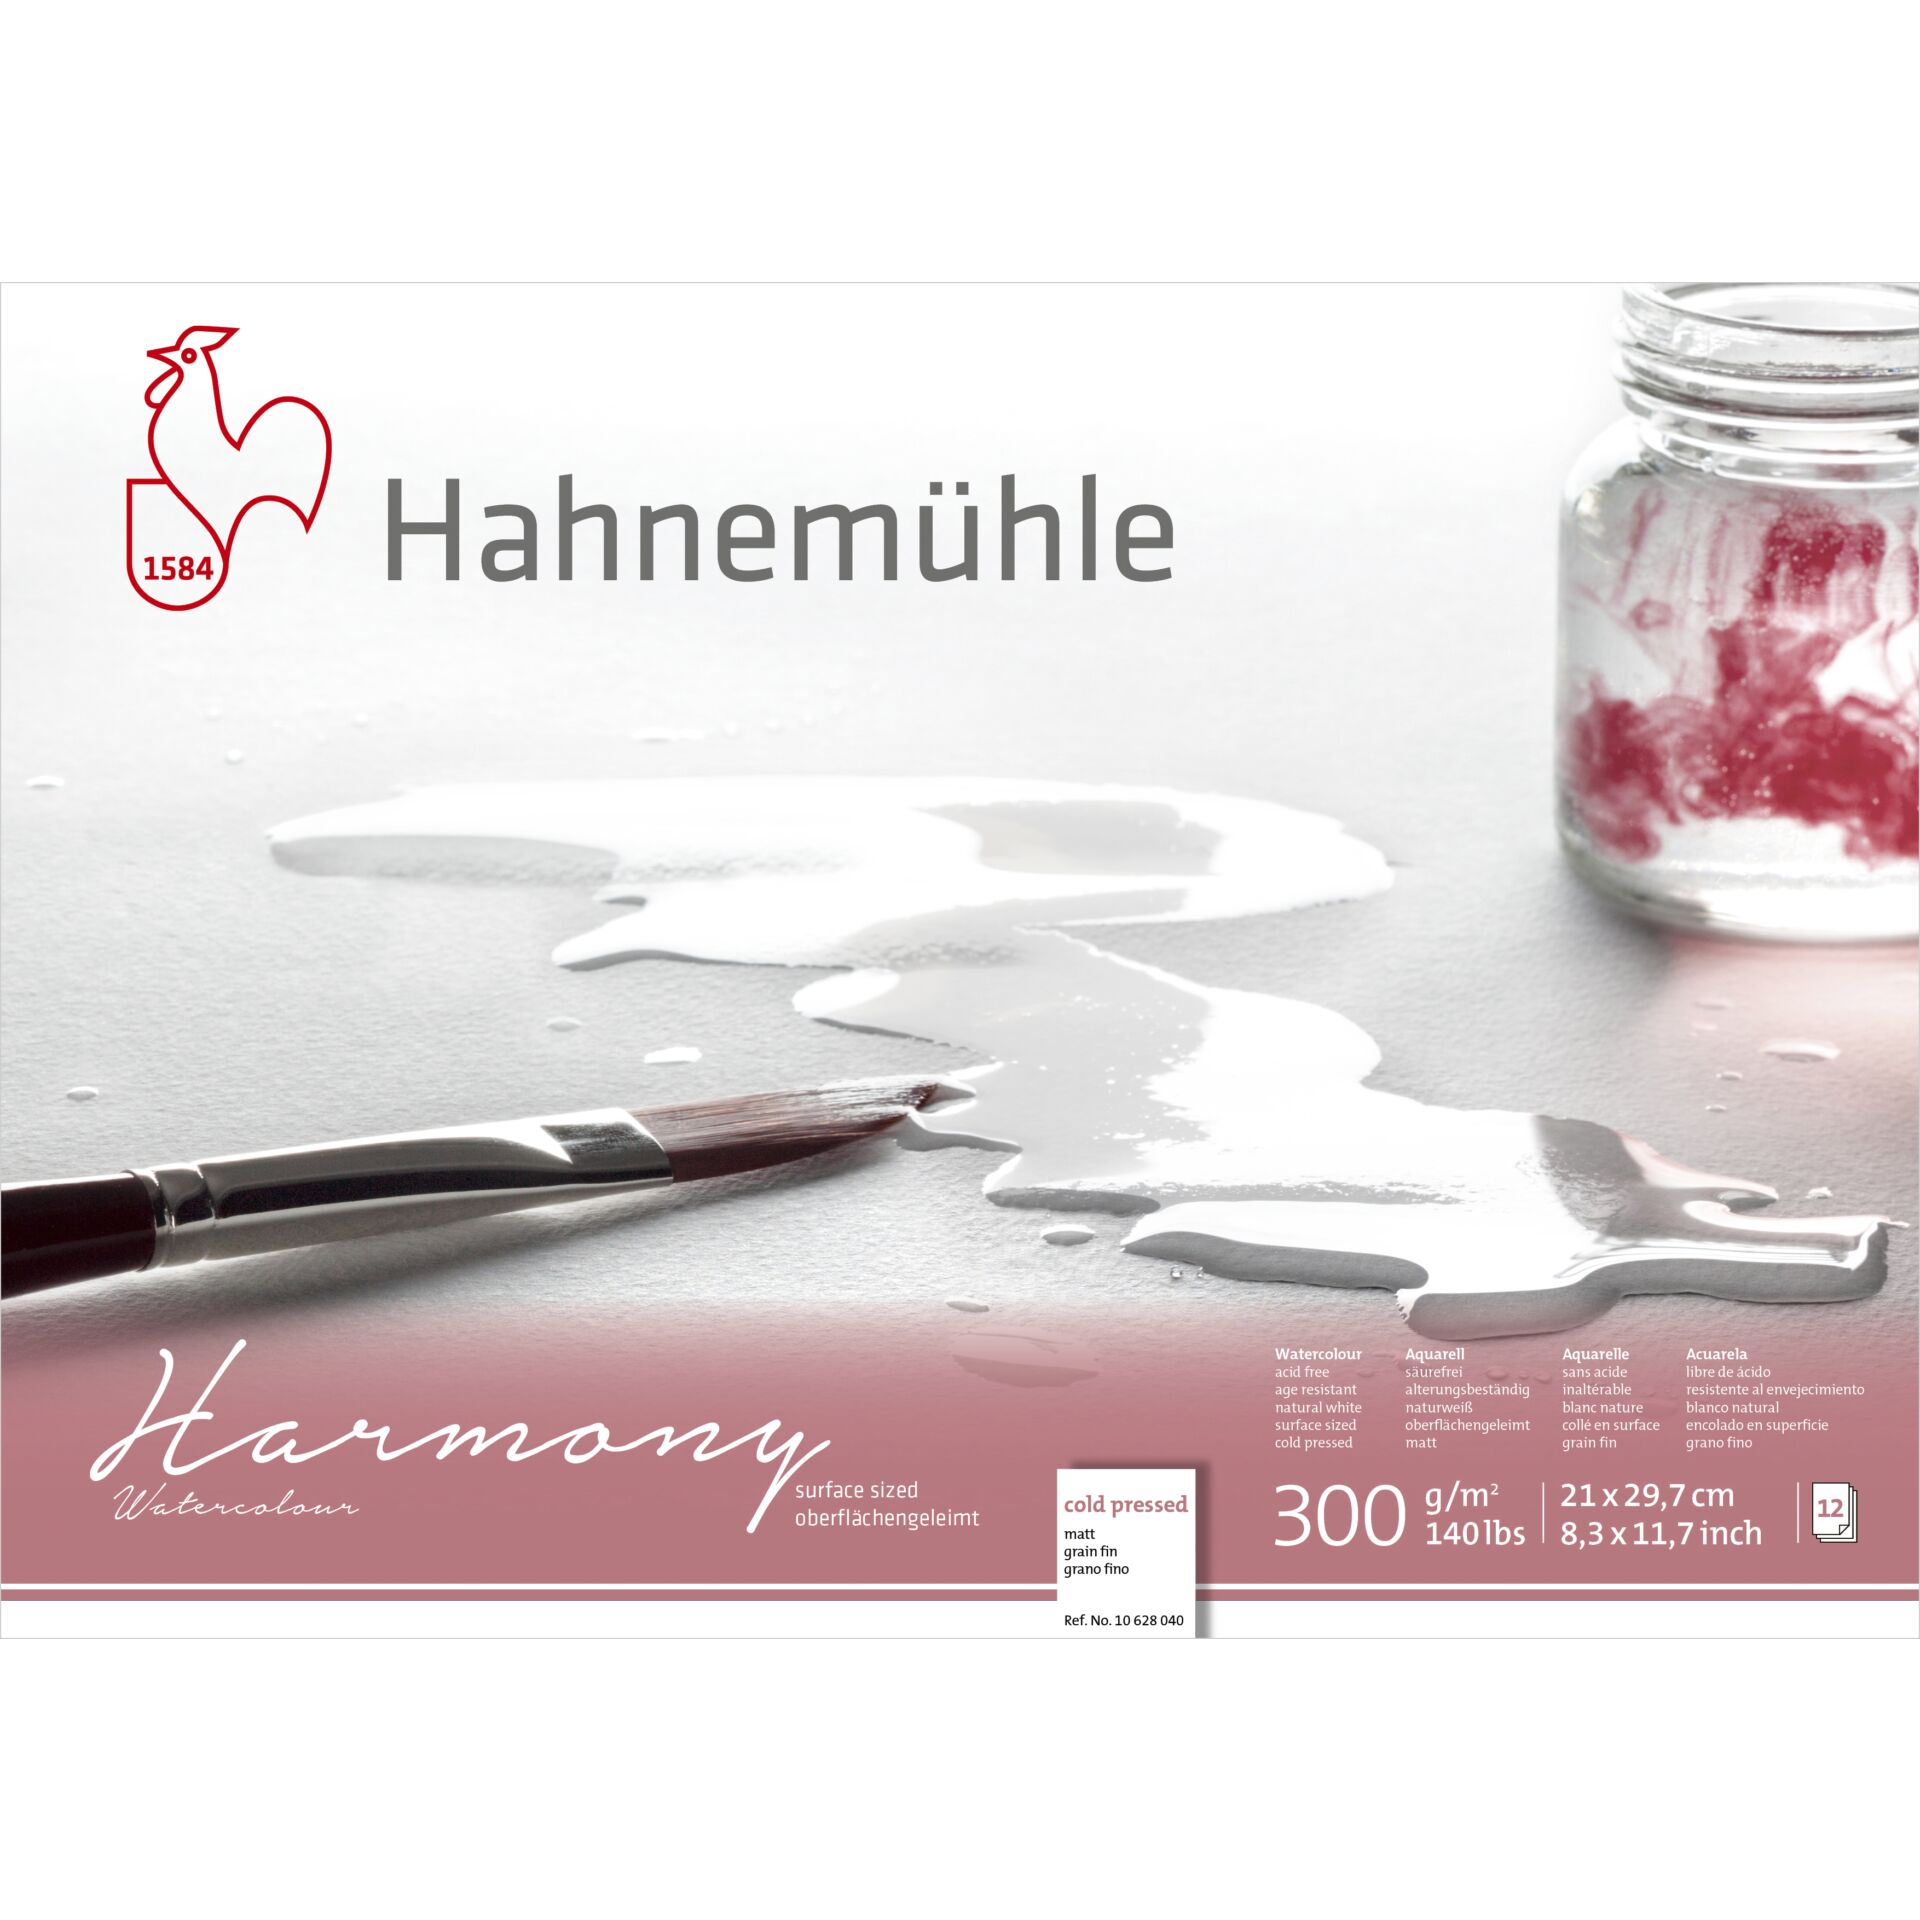 Hahnemühle Harmony Watercolour cold pressed 12 Sheets 300 g